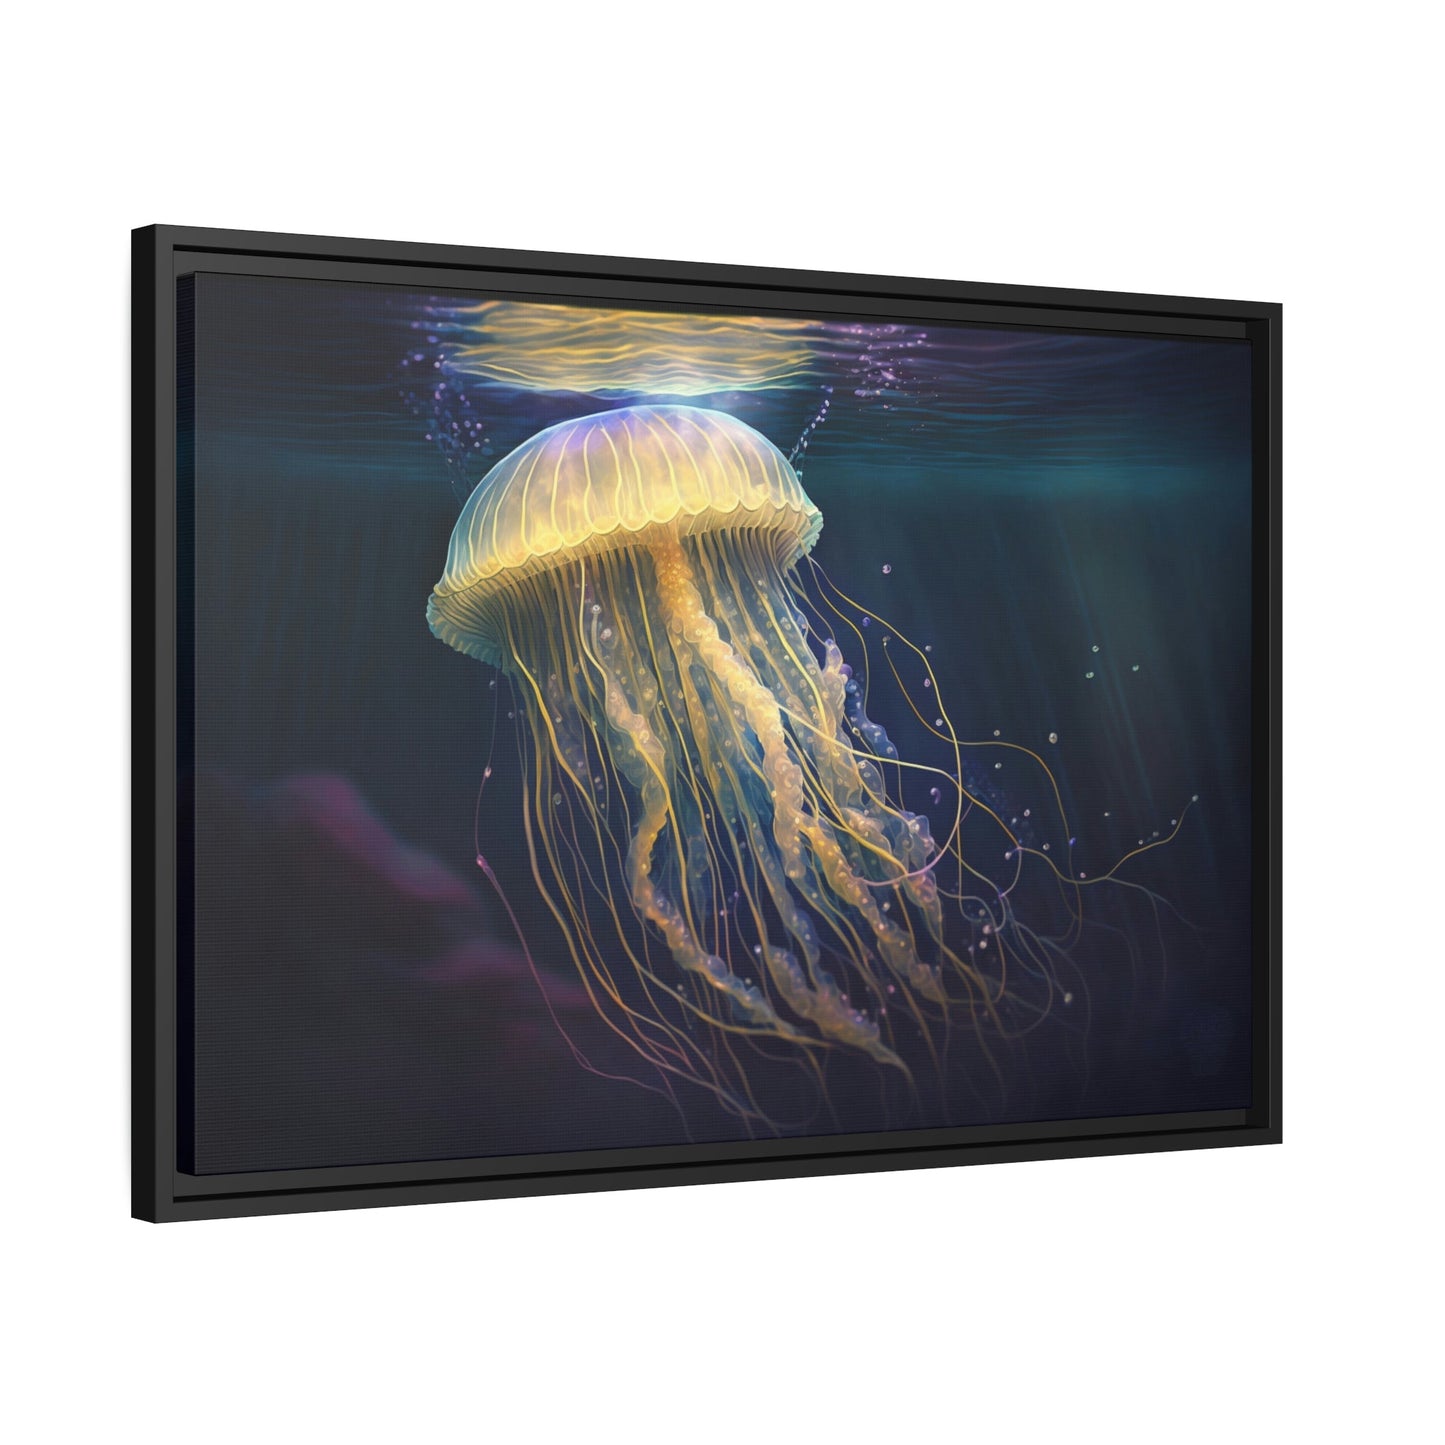 Jellyfish Wonder: Captivating Canvas Wall Art Prints for Ocean Lovers